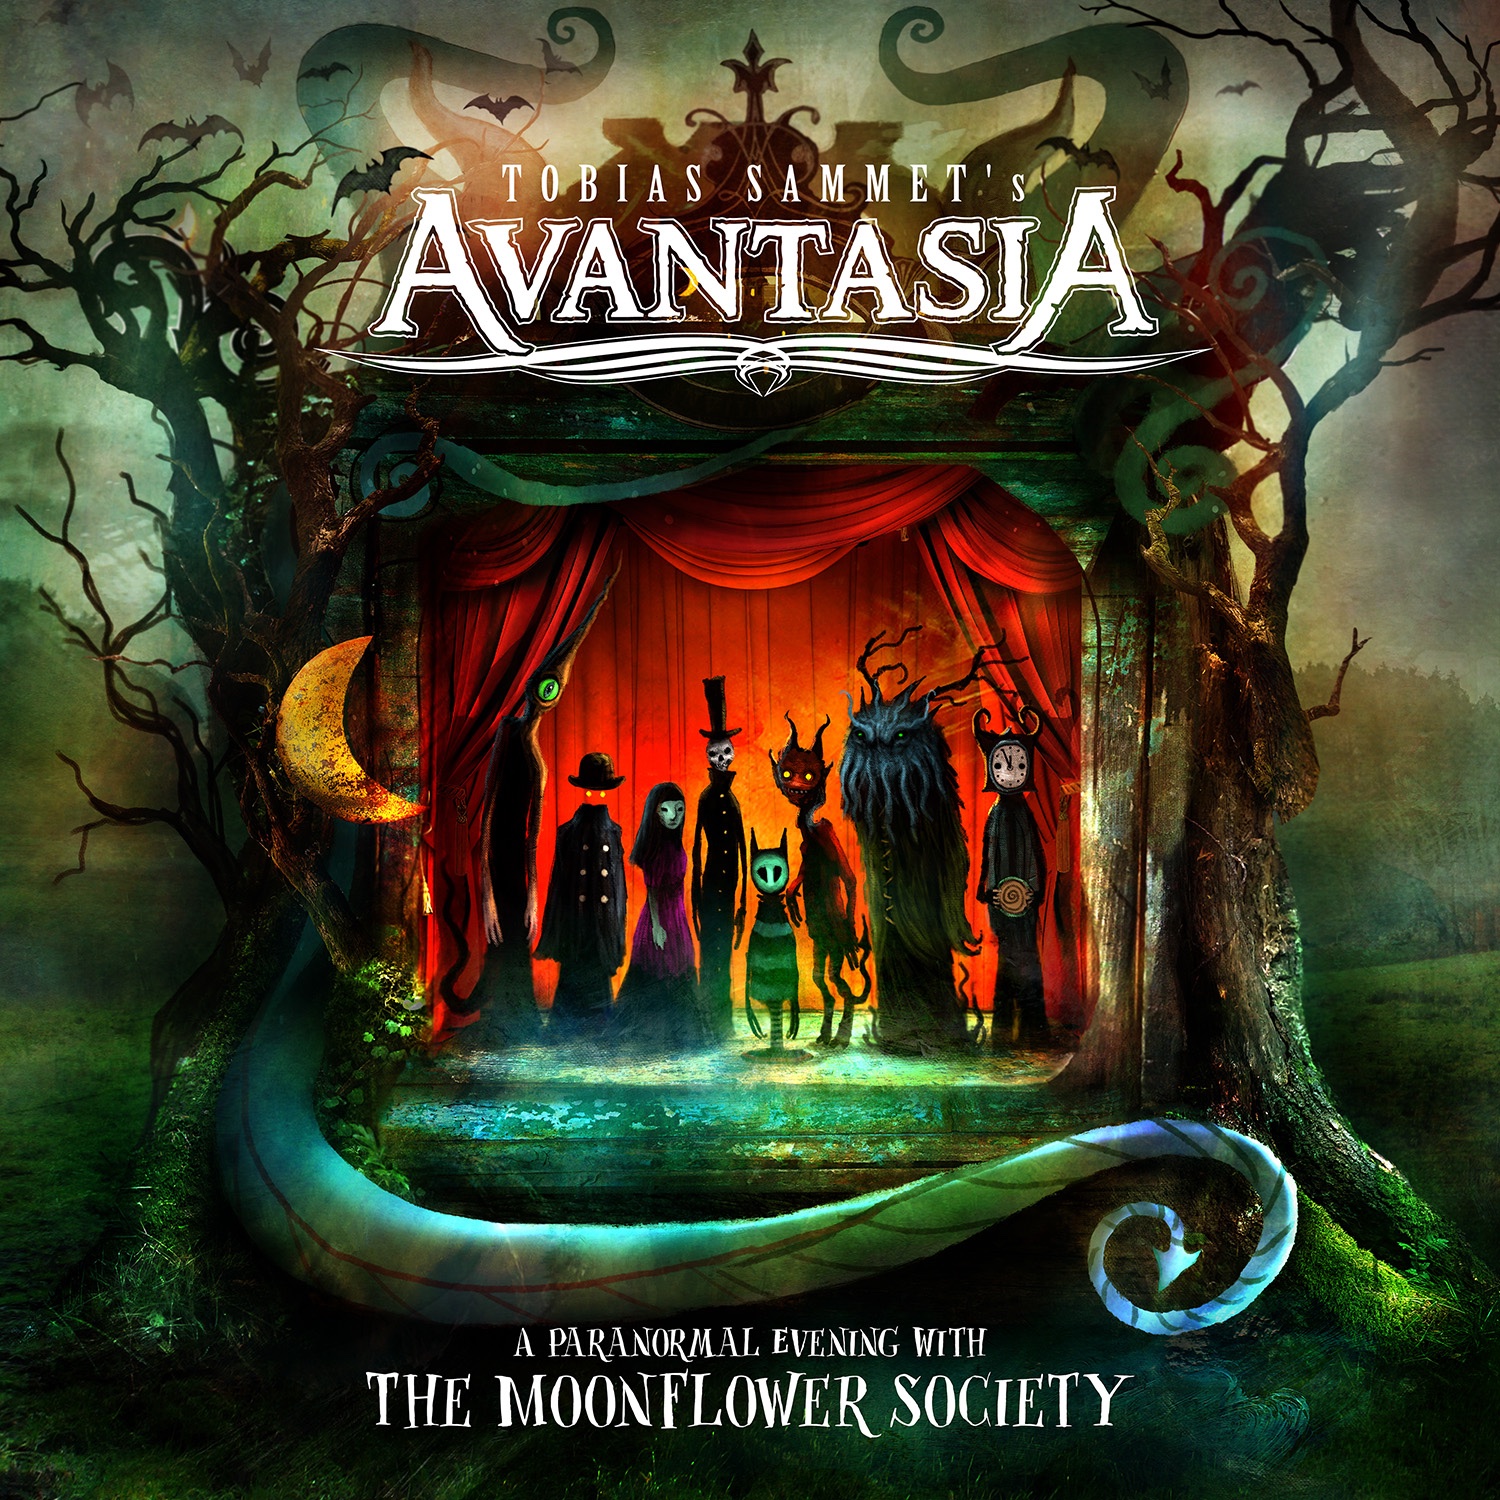 AVANTASIA “A Paranormal Evening with the Moonflower Society”